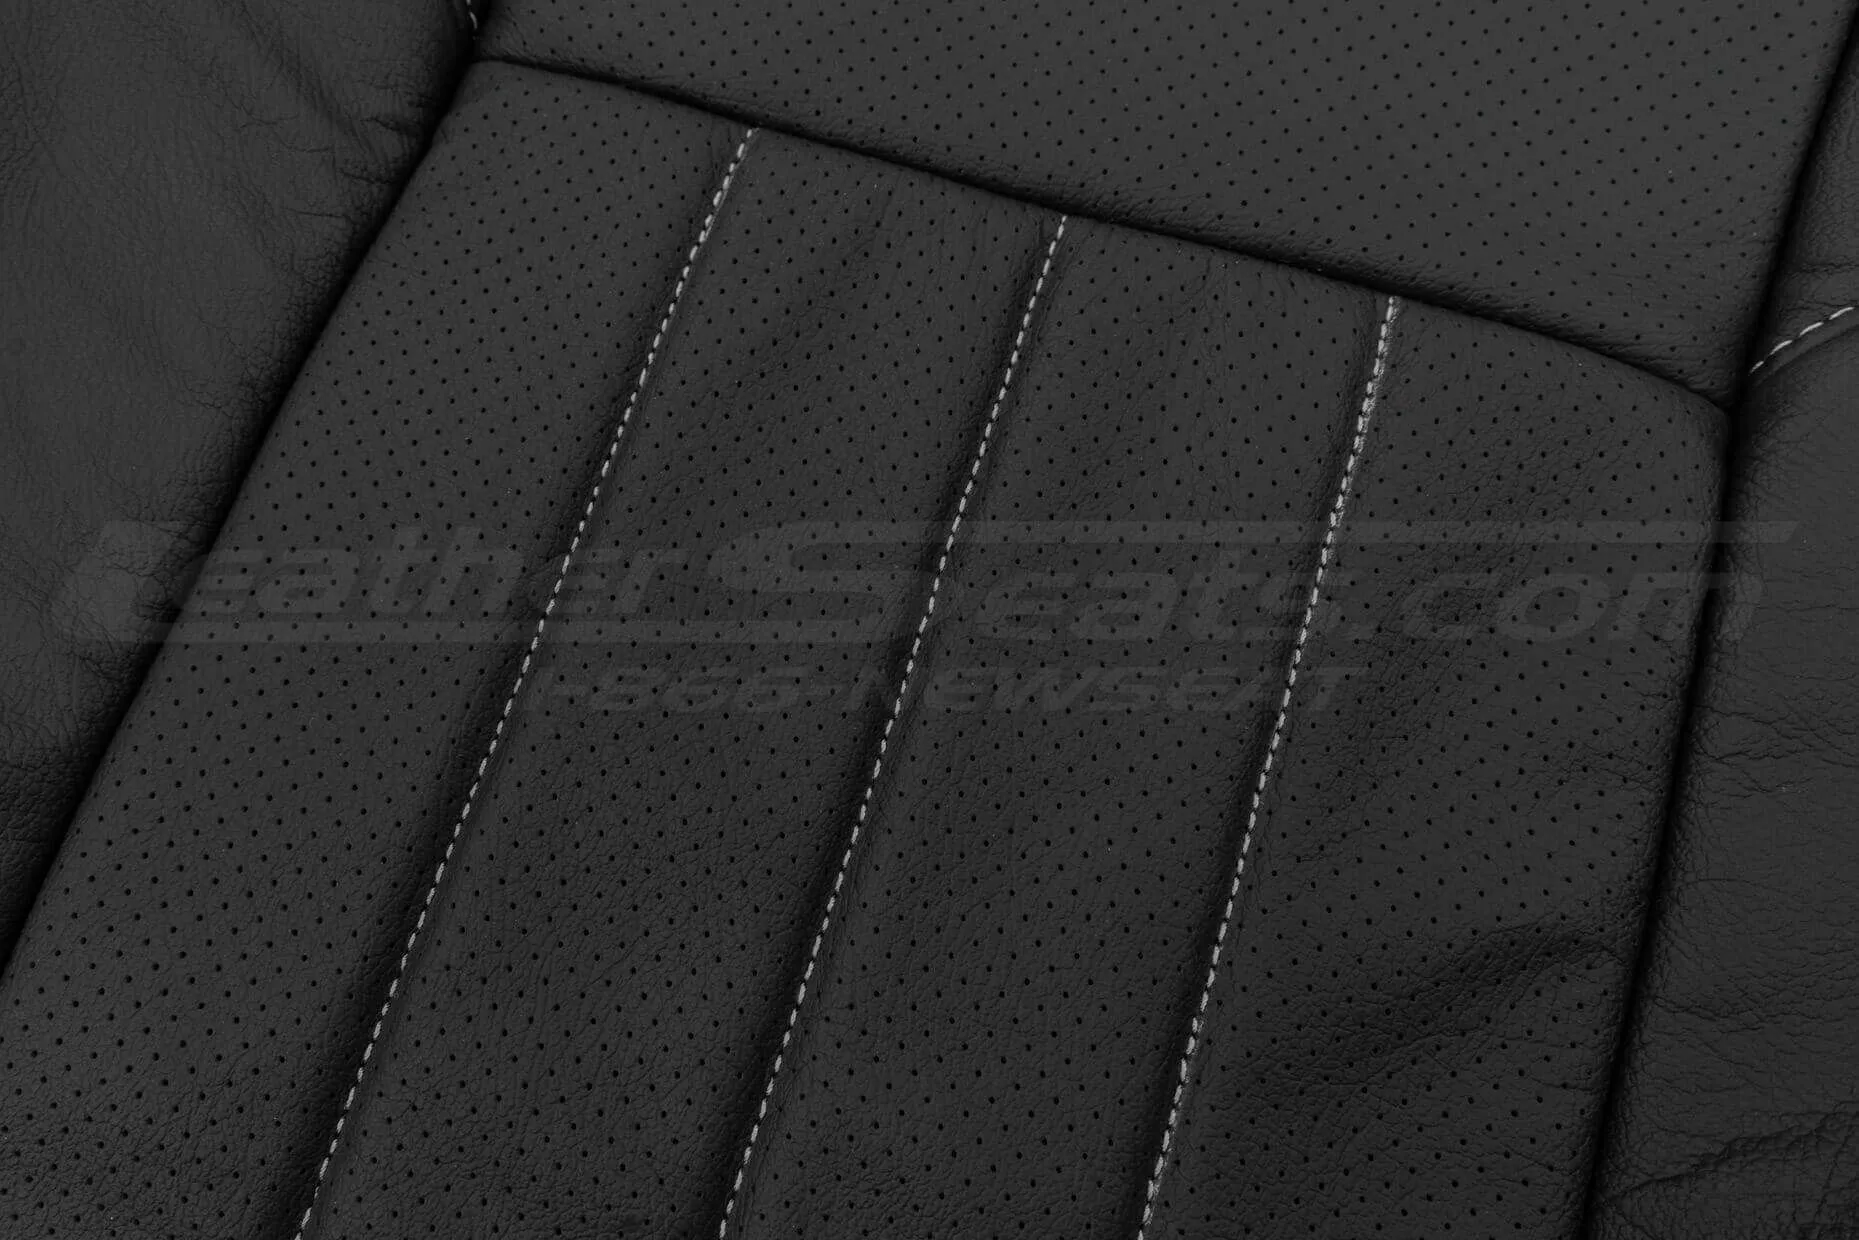 Body Perforation and leather texture close-up